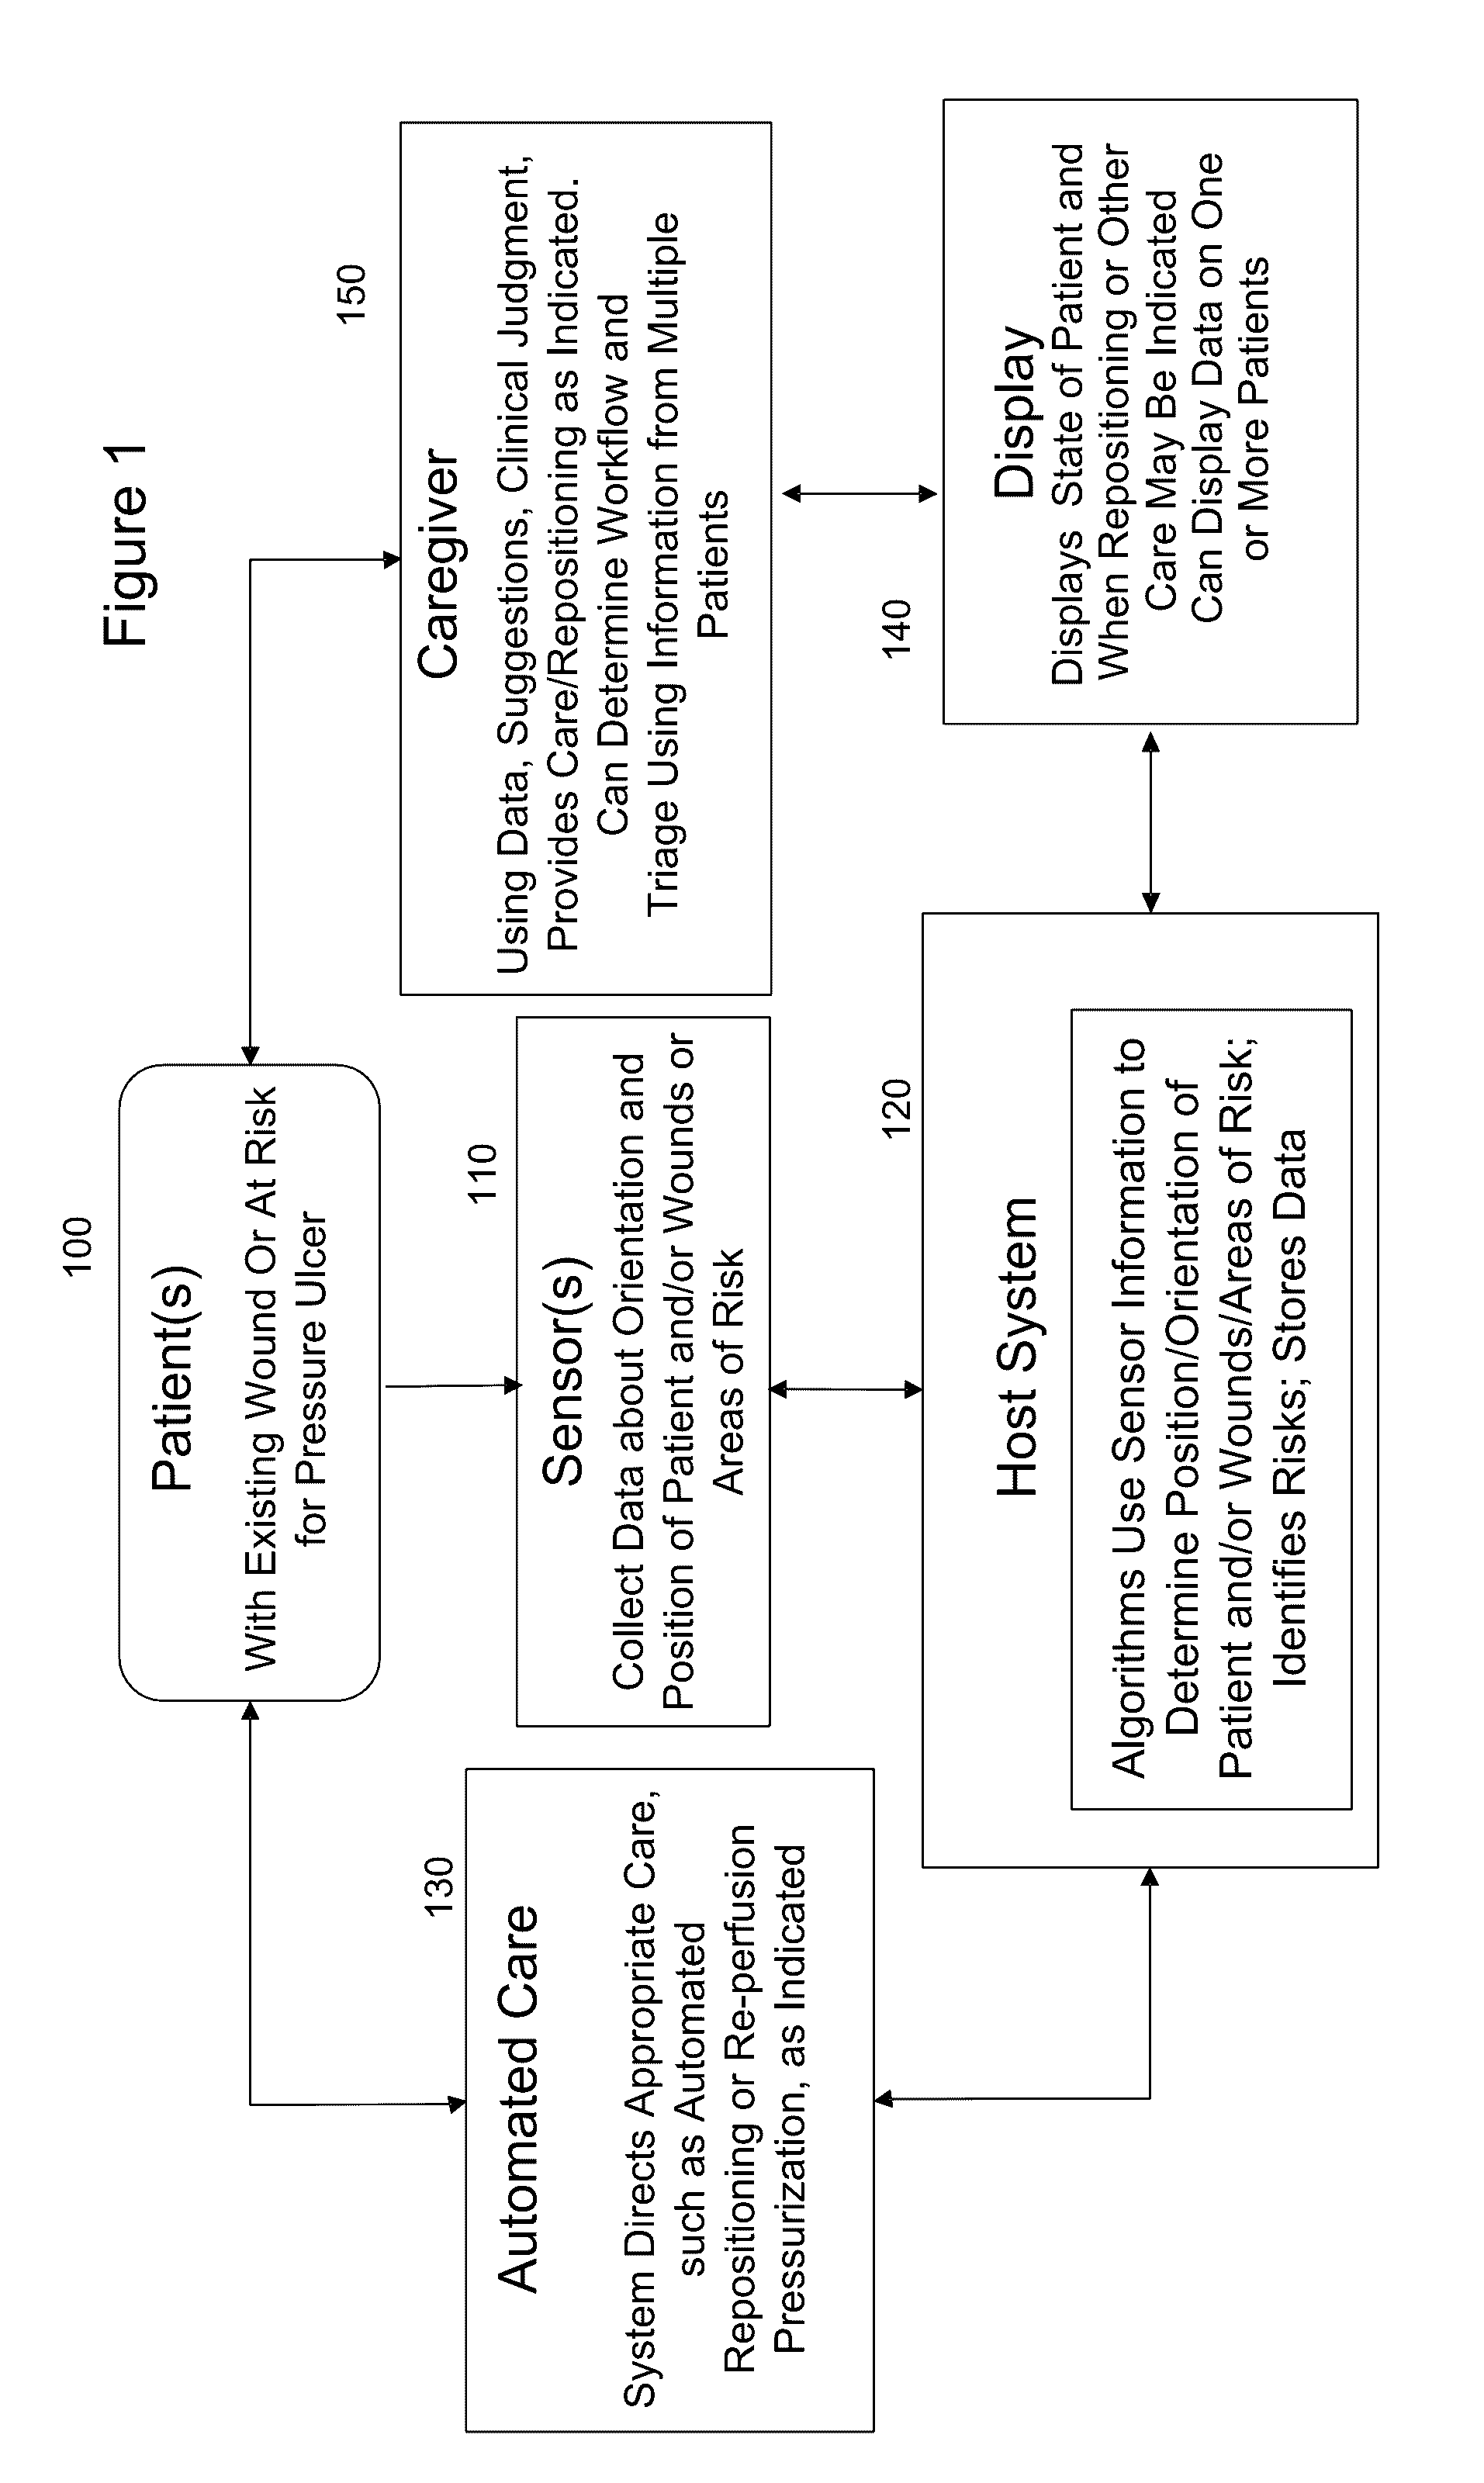 Calibrated Systems, Devices and Methods for Preventing, Detecting, and Treating Pressure-Induced Ischemia, Pressure Ulcers, and Other Conditions